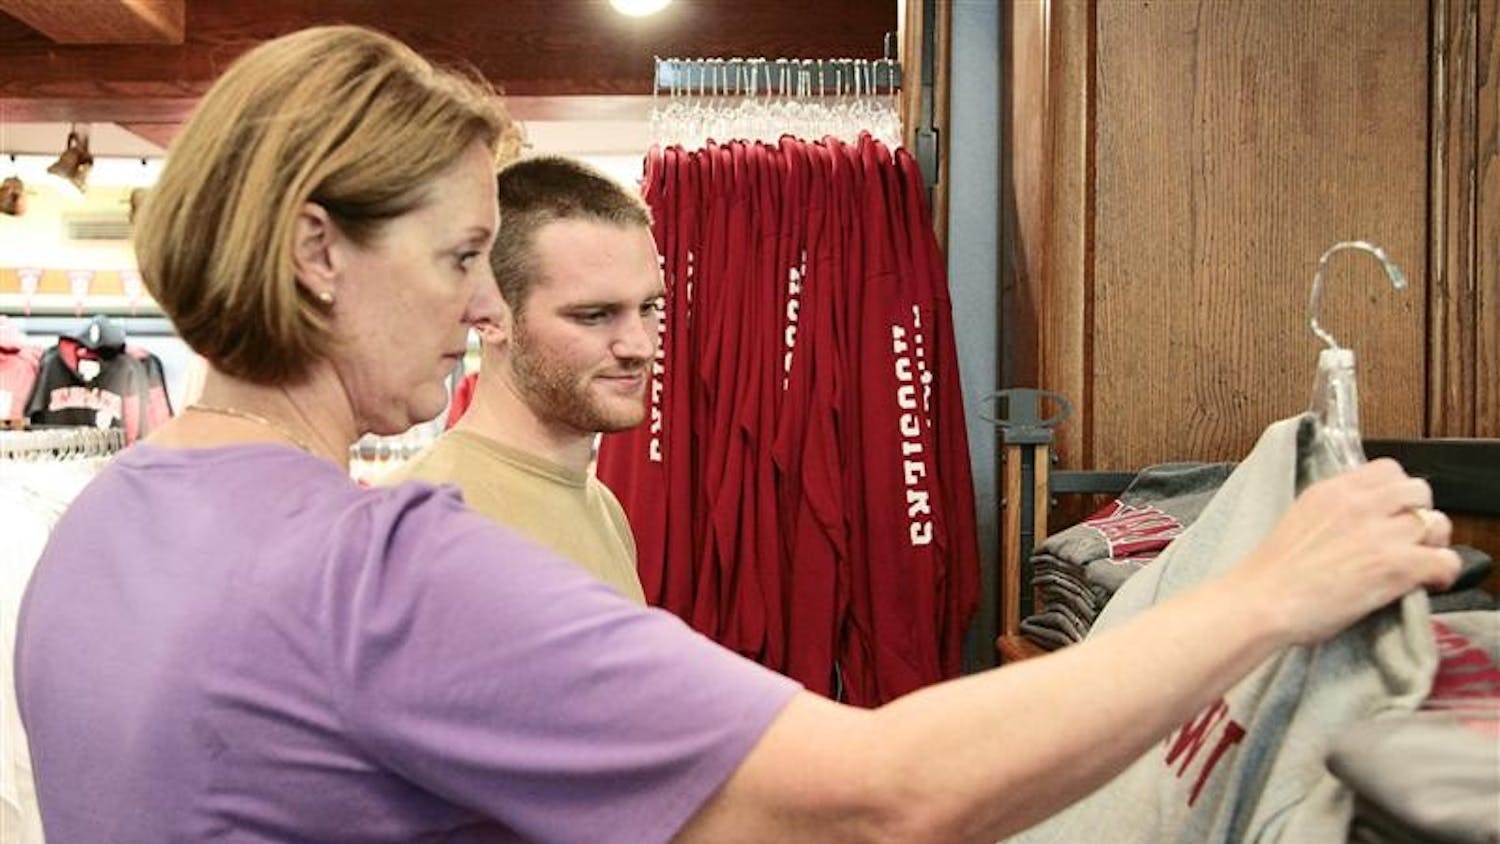 Incoming freshman Nathan Miller and his mother Betsy Miller browse IU merchandise Wednesday afternoon at the IU Bookstore. Hundreds of incoming students and their families will be descending on campus for Freshman Orientation.